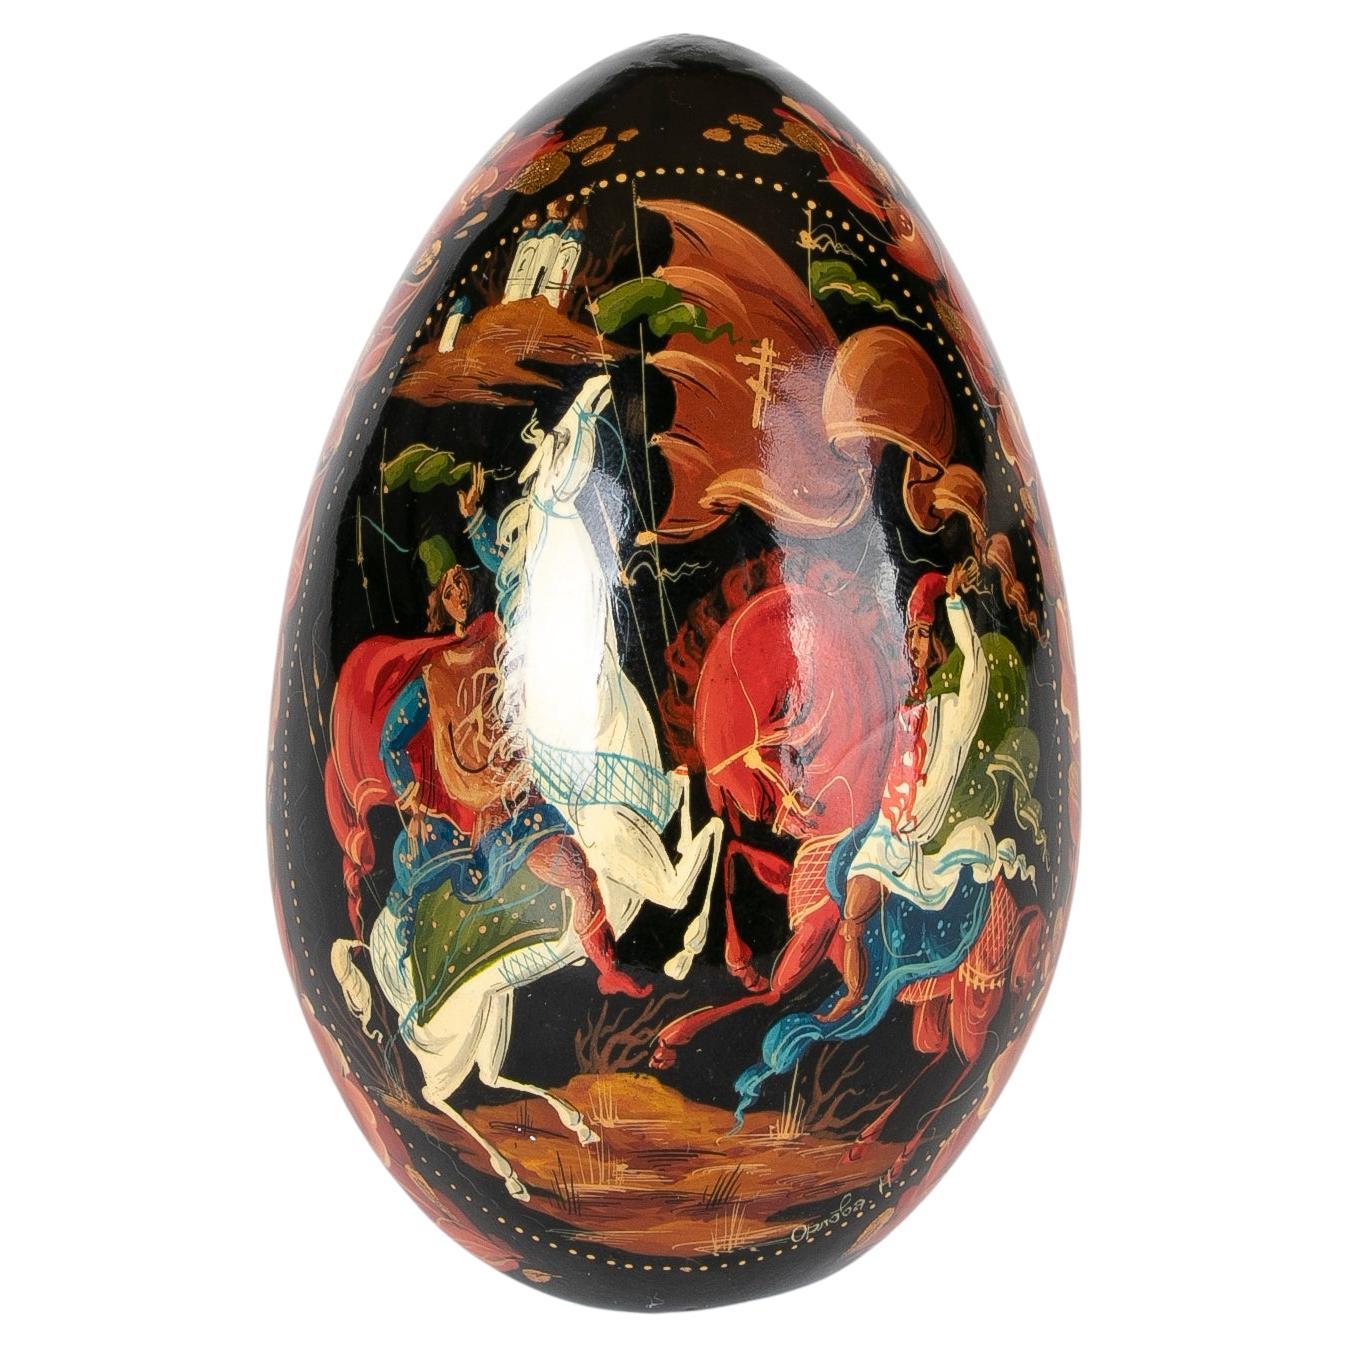 Hand-Painted Paper Mache Egg, Signed and Dated